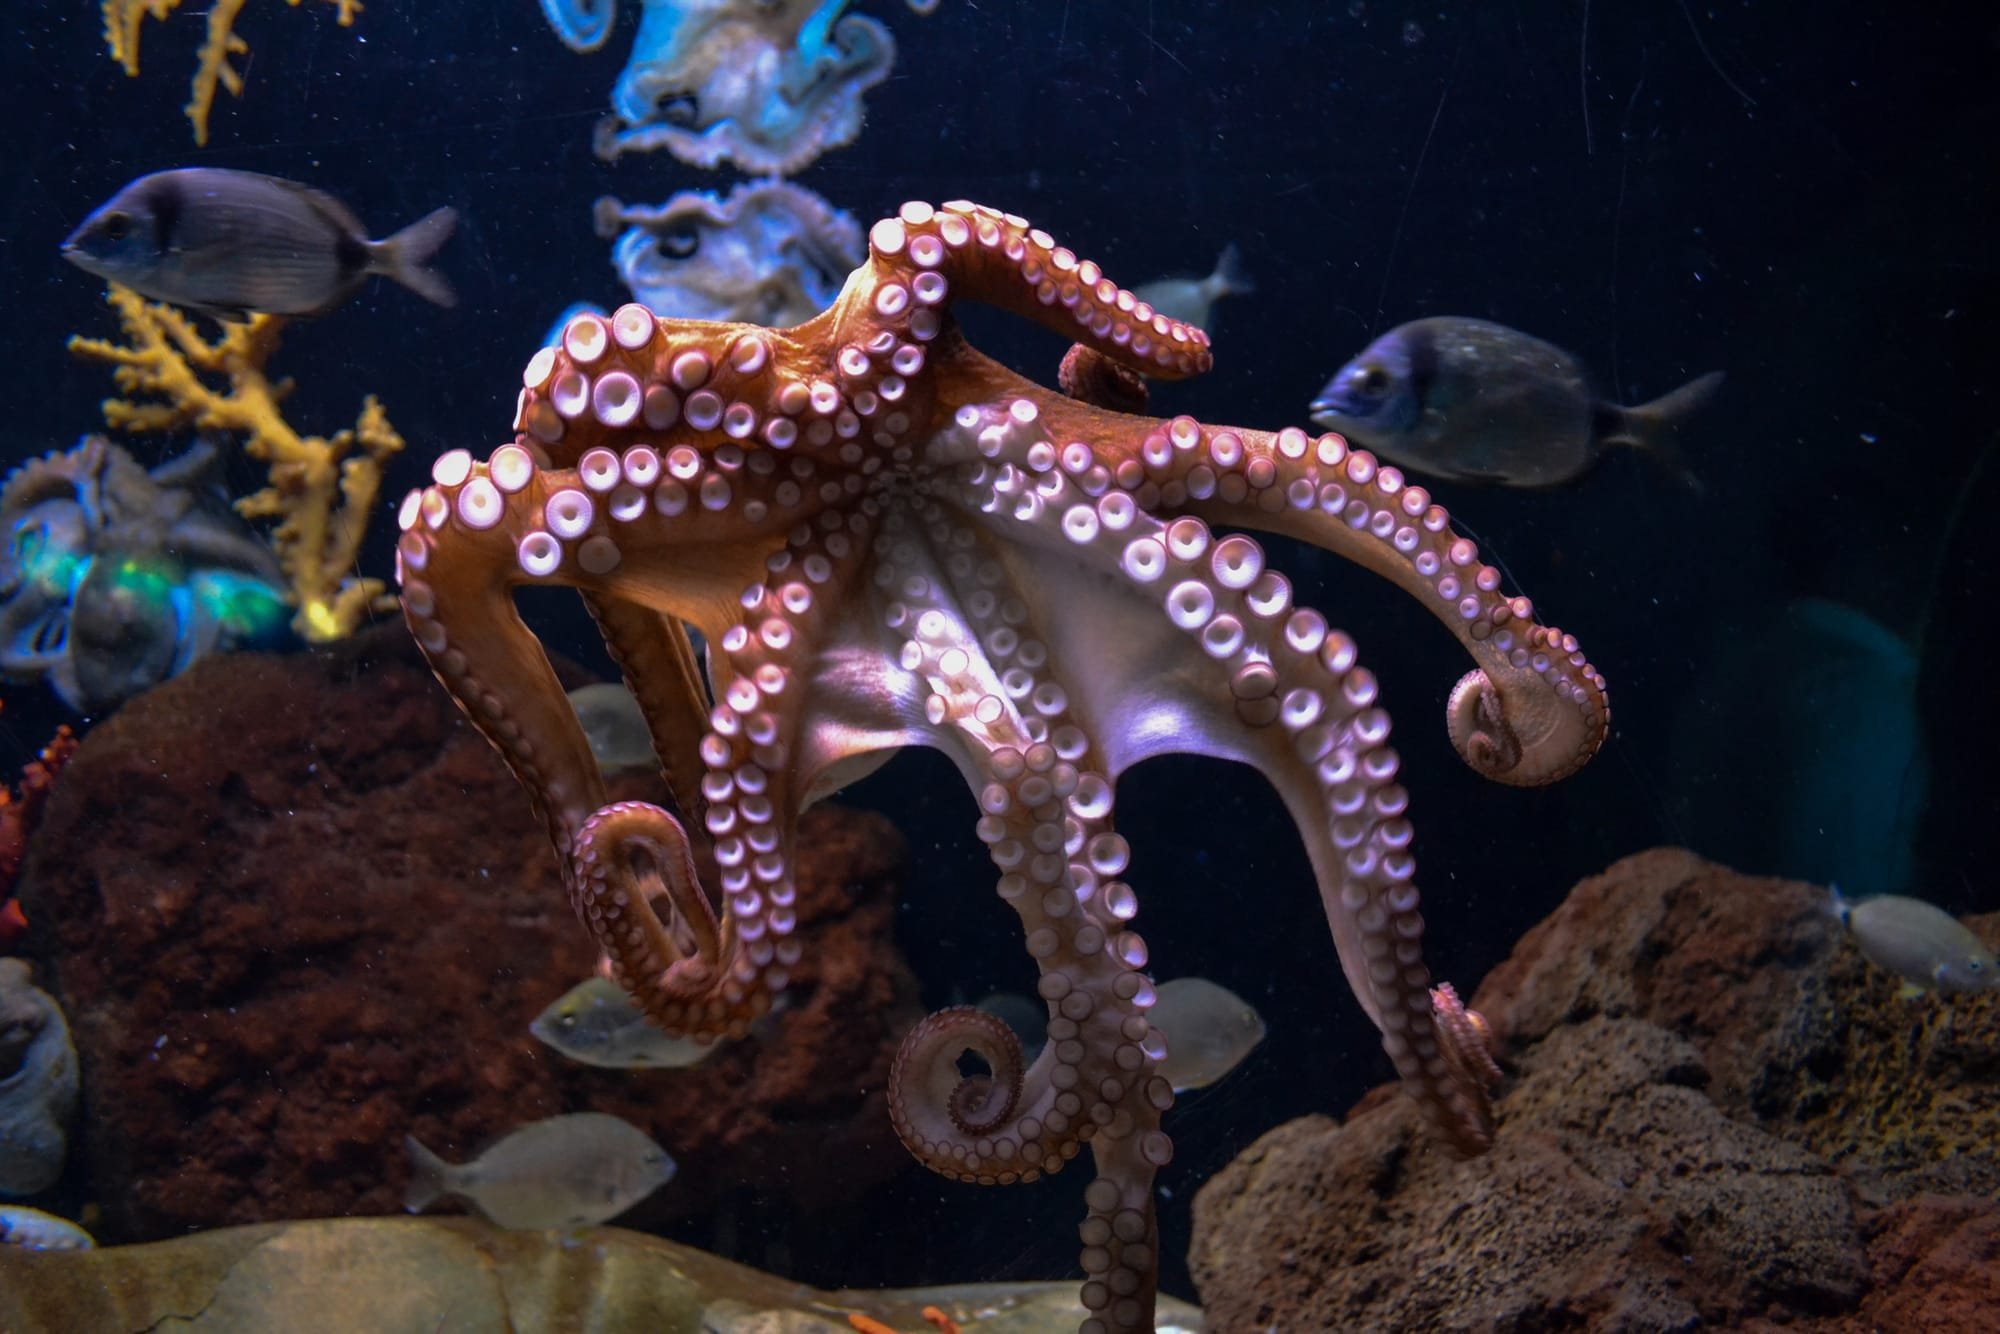 An eight-armed octopus has (only) one brain